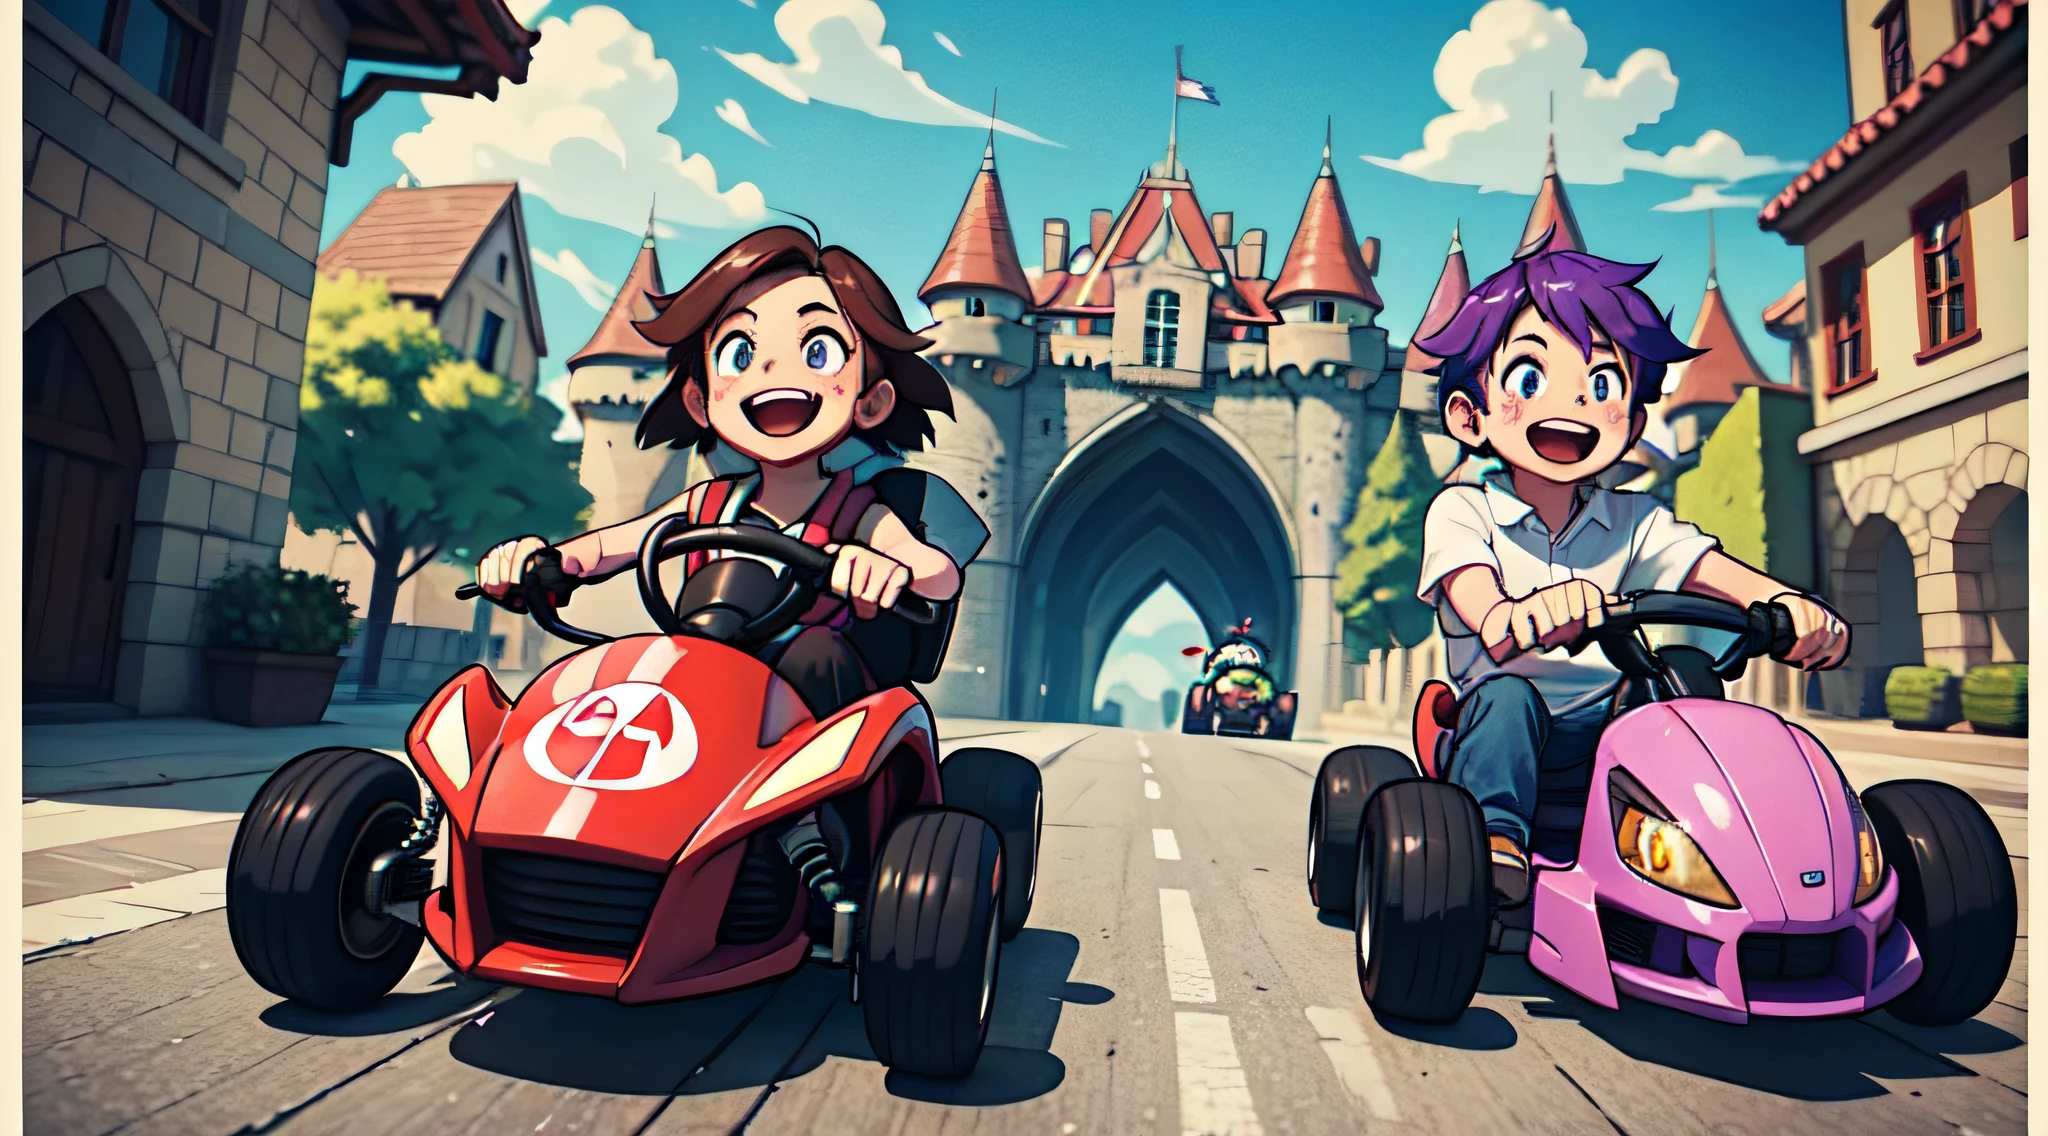 Boy with purple hair and girl with brown hair、great laughter、Racing on a kart machine、Fun atmosphere、high-level image quality、Castle Circuit、Deformed、Nintendo